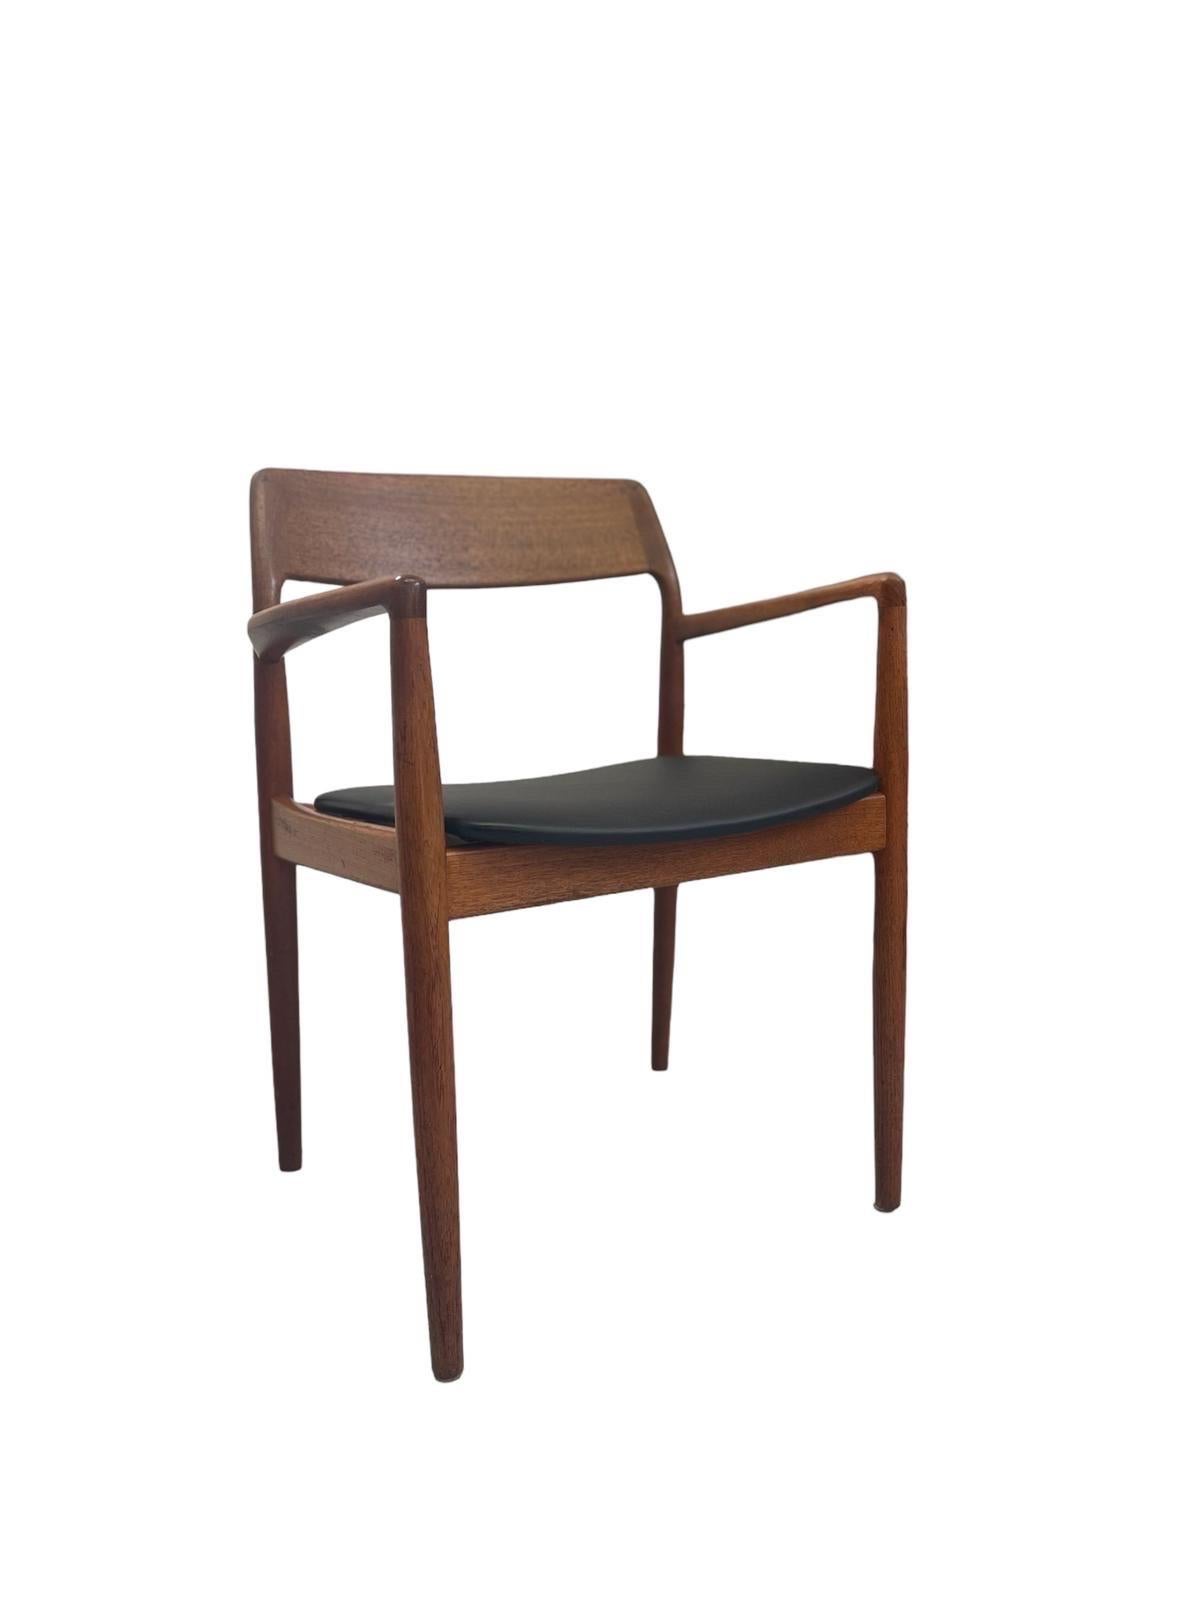 Vintage Danish Modern Dining Chairs by Jl Moller Set of 4. In Good Condition For Sale In Seattle, WA